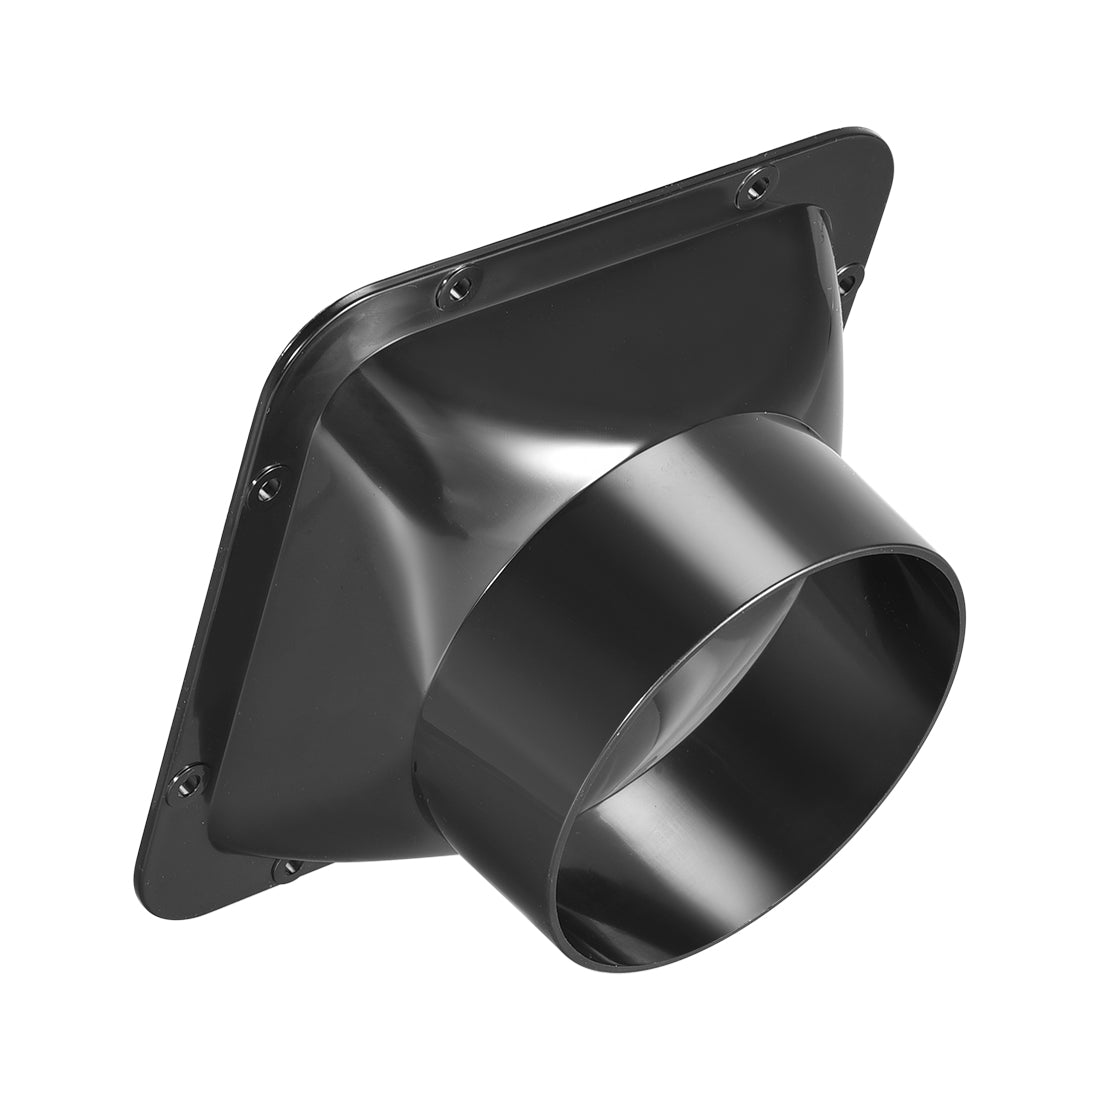 uxcell Uxcell Black Duct Connector Square Flange ABS Plastic Air Outlet Inlet Adaptor for 97mm Dia. Hose